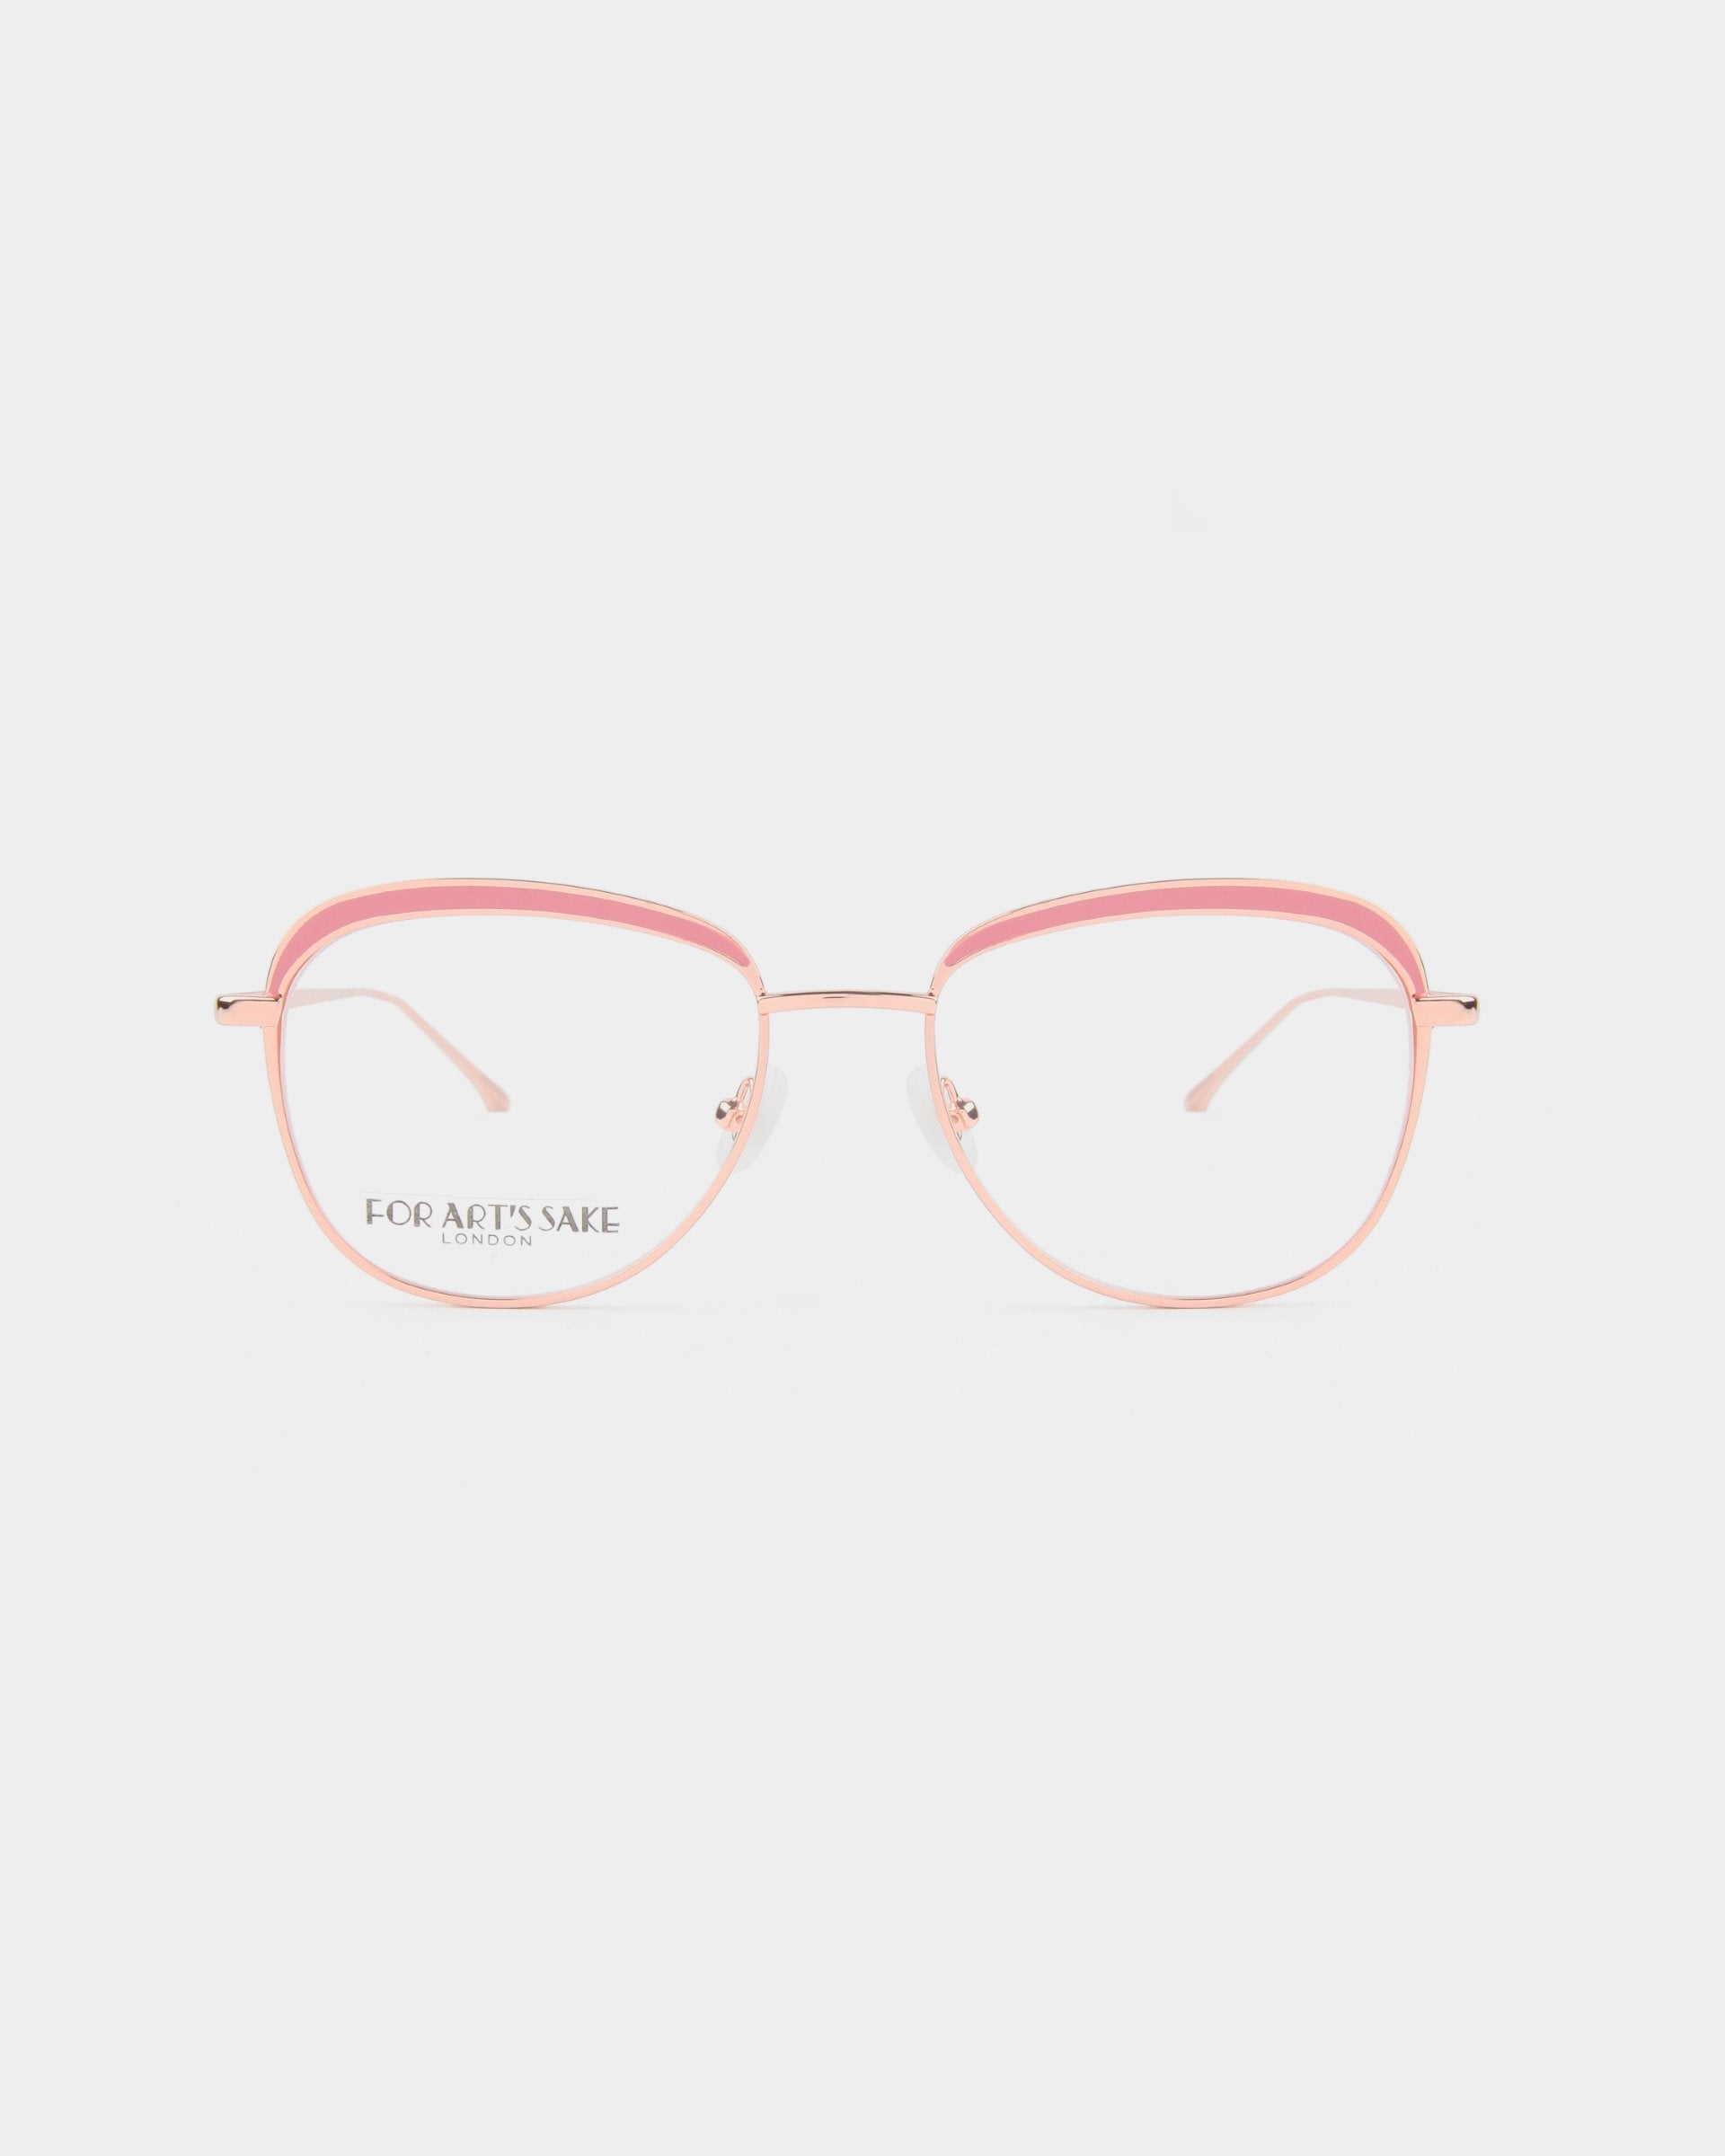 A pair of stylish Smoothie eyeglasses with rose gold wire frames and pink acetate accents along the top, featuring 18-karat gold plating for an added touch of luxury. The lenses are clear, with &quot;LONDON&quot; and &quot;FOR ART&#39;S SAKE®&quot; visible on the left lens. The background is plain white.